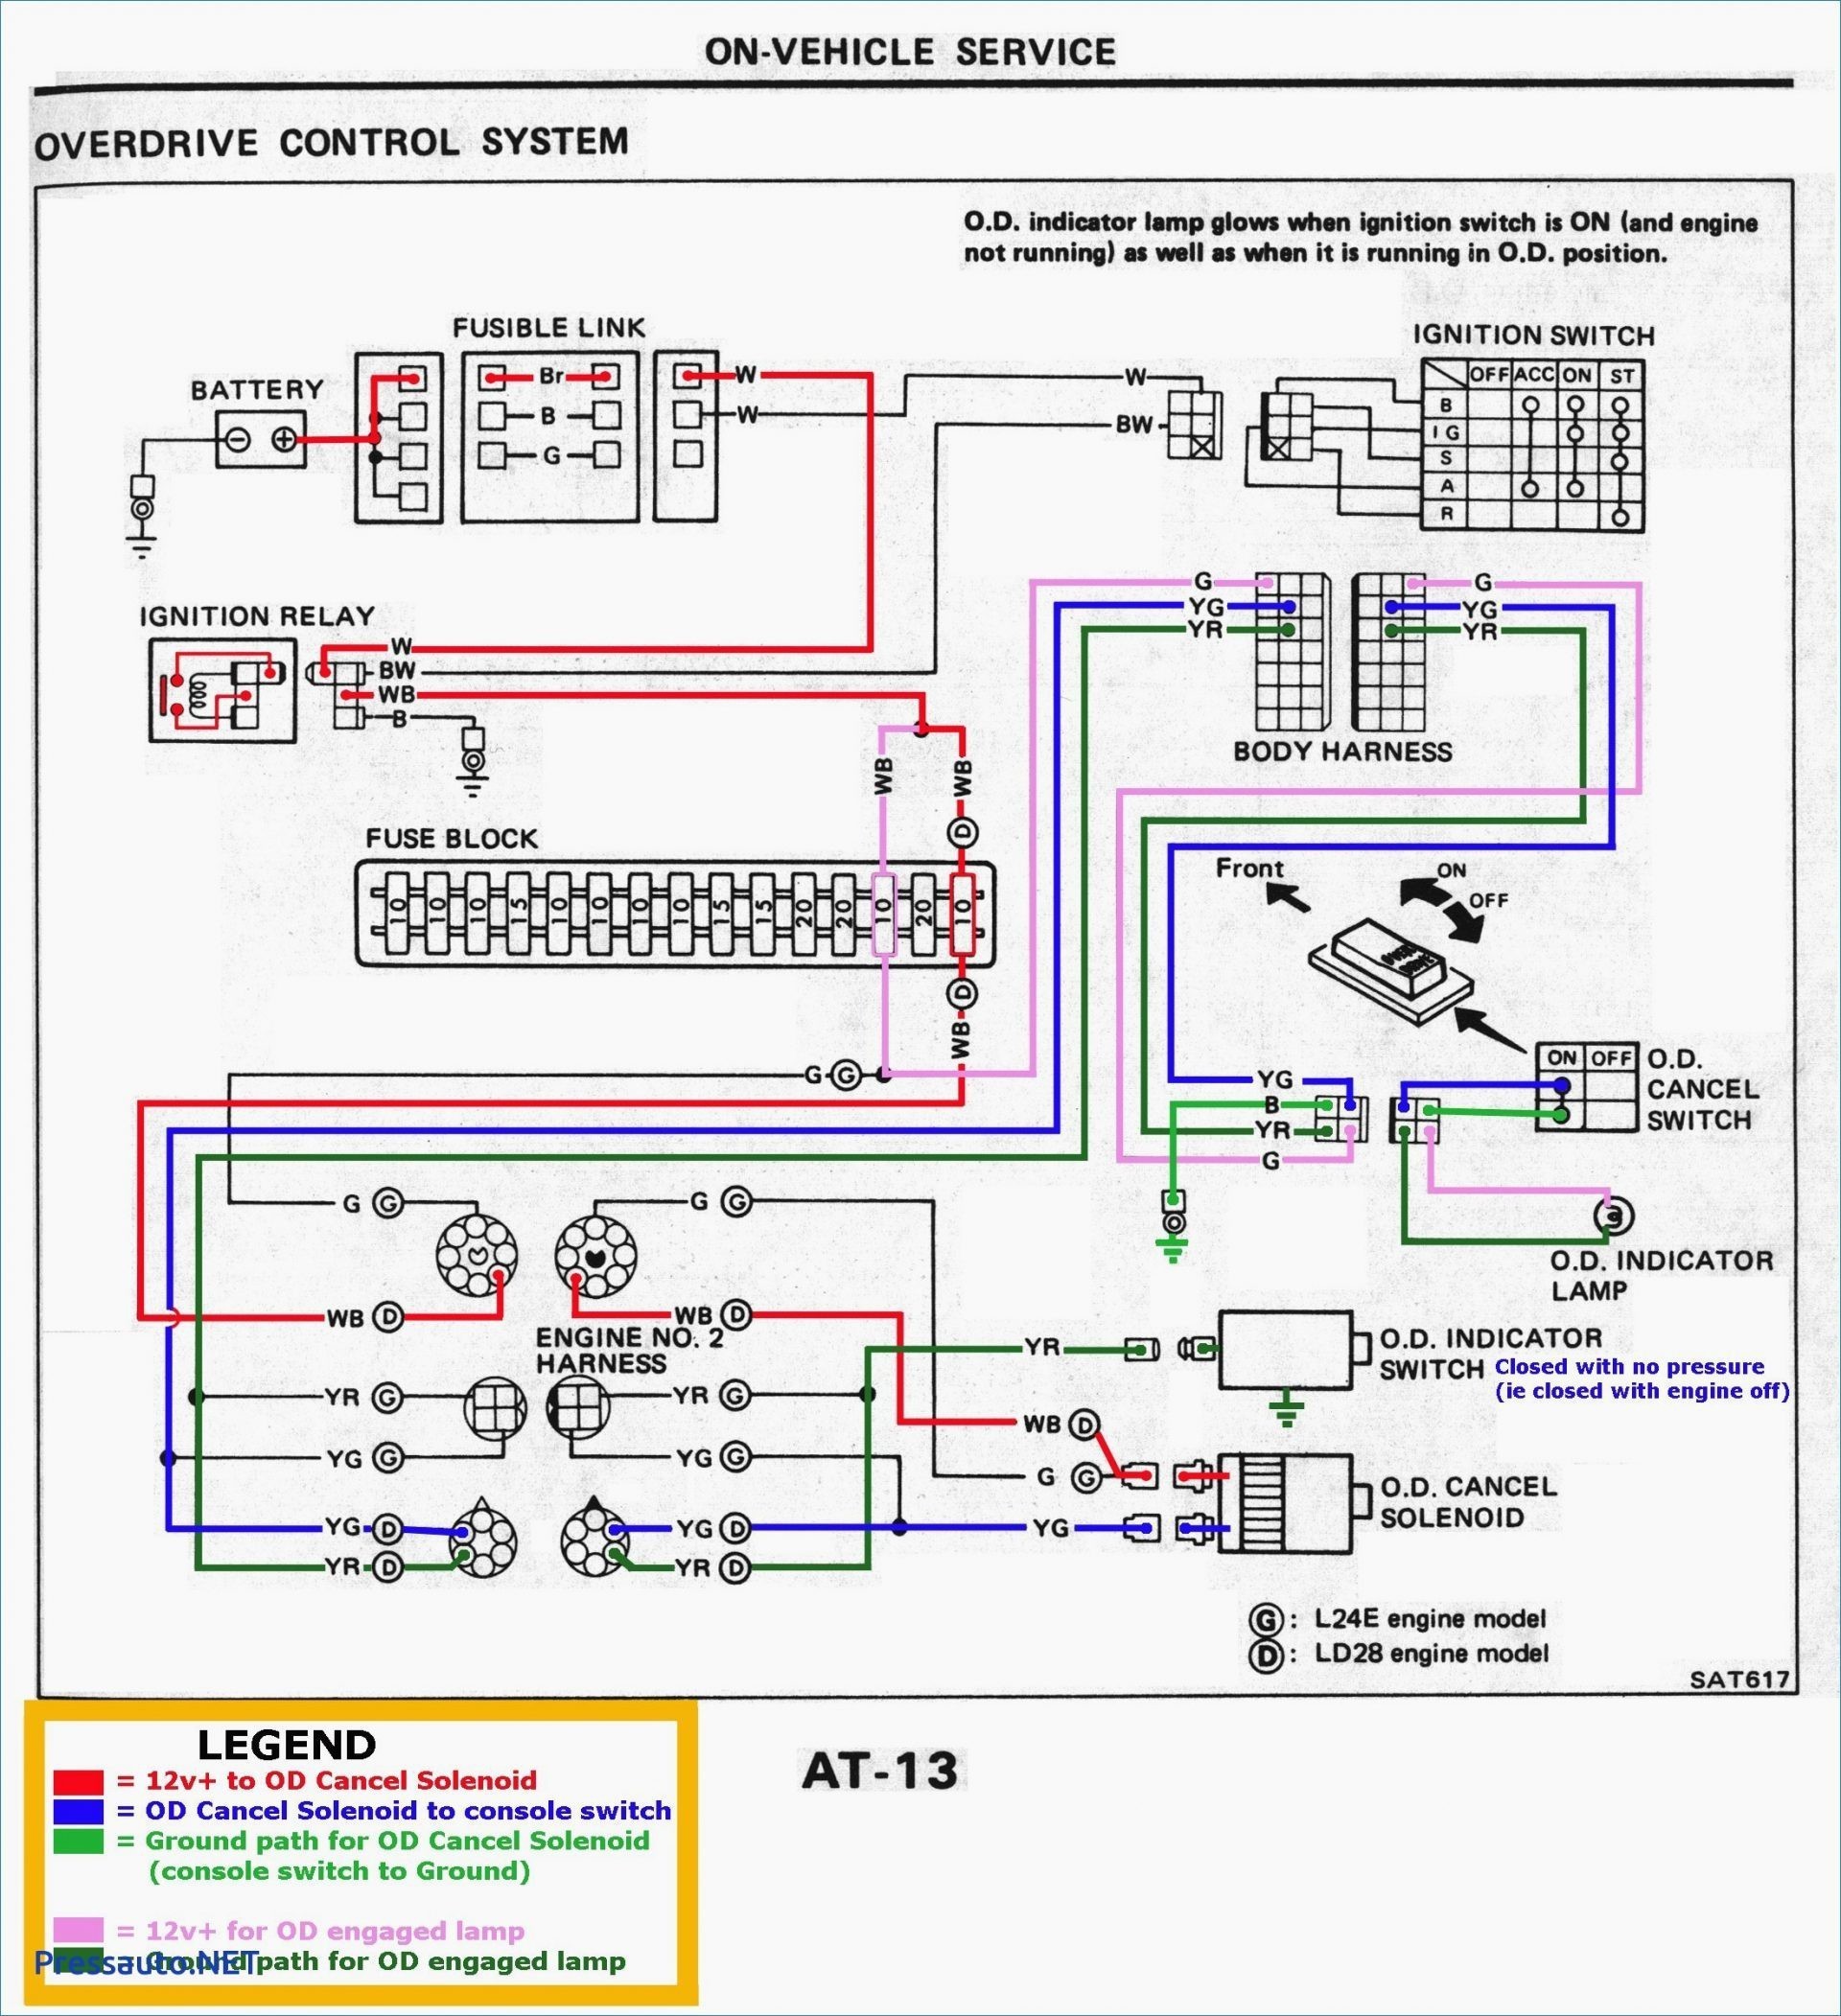 Wiring Diagram for Electric Stove Valid House Electrical Wiring Diagram Australia Valid Wiring Diagram Fresh